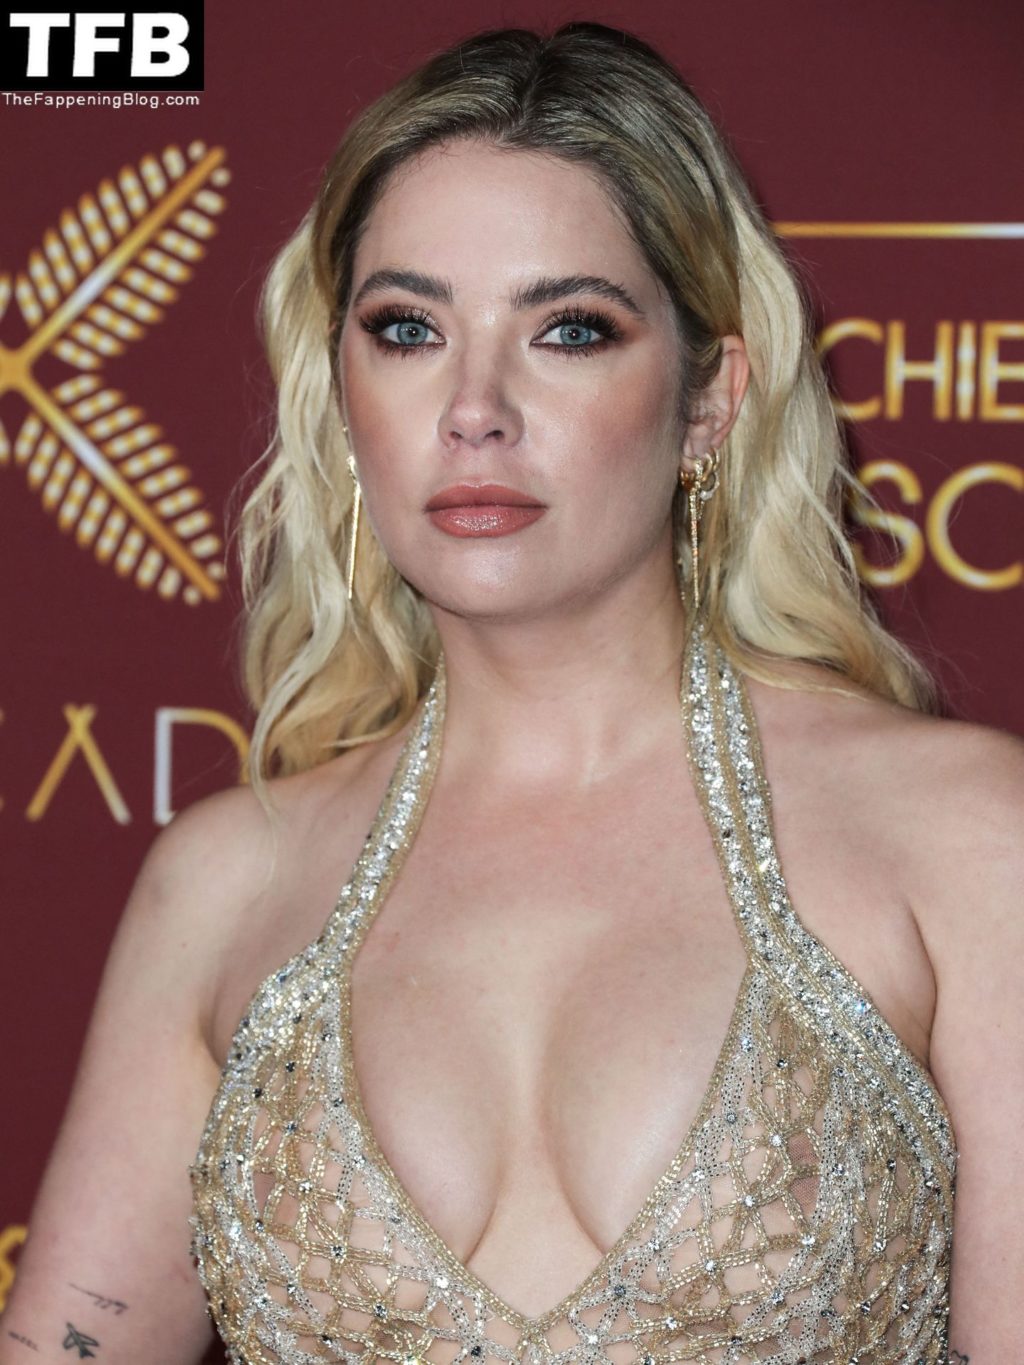 Ashley Benson Sexy The Fappening Blog 13 1024x1365 - Ashley Benson Displays Nice Cleavage at the Darren Dzienciol and Richie Akiva Oscar Party (39 Photos)